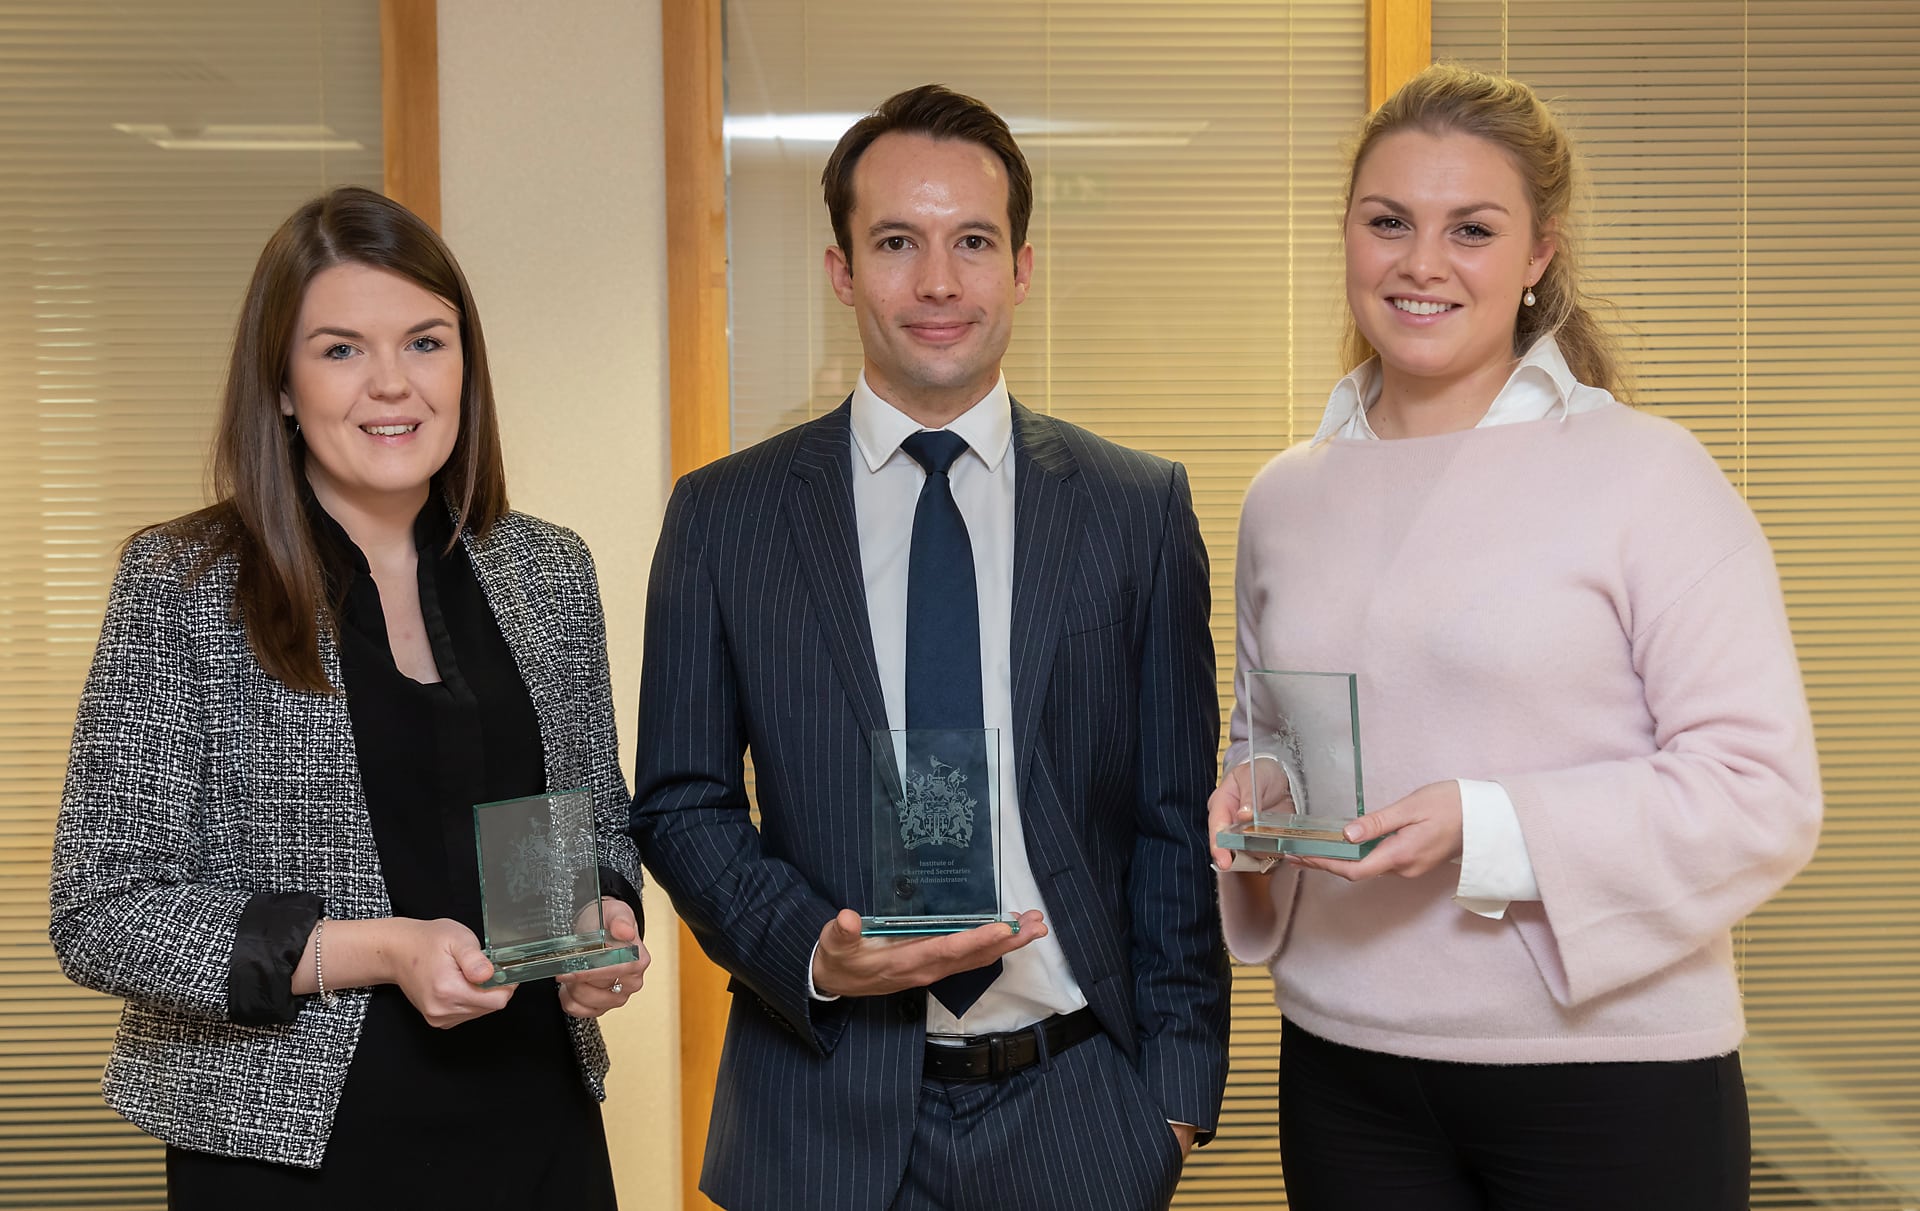 Gemma Woods, Matt Falla and Gwen Norman posing side by side with their ICSA Awards 